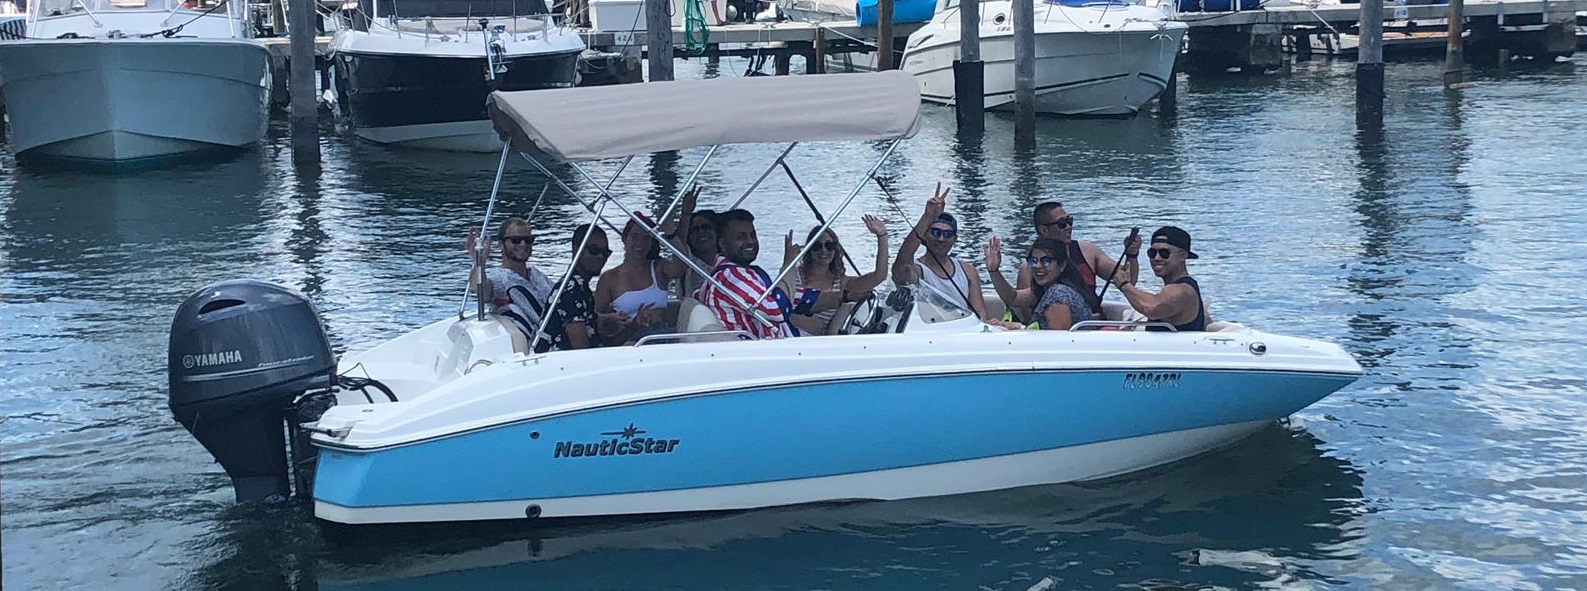 Rent Boat in Miami Now! (1 Hour)